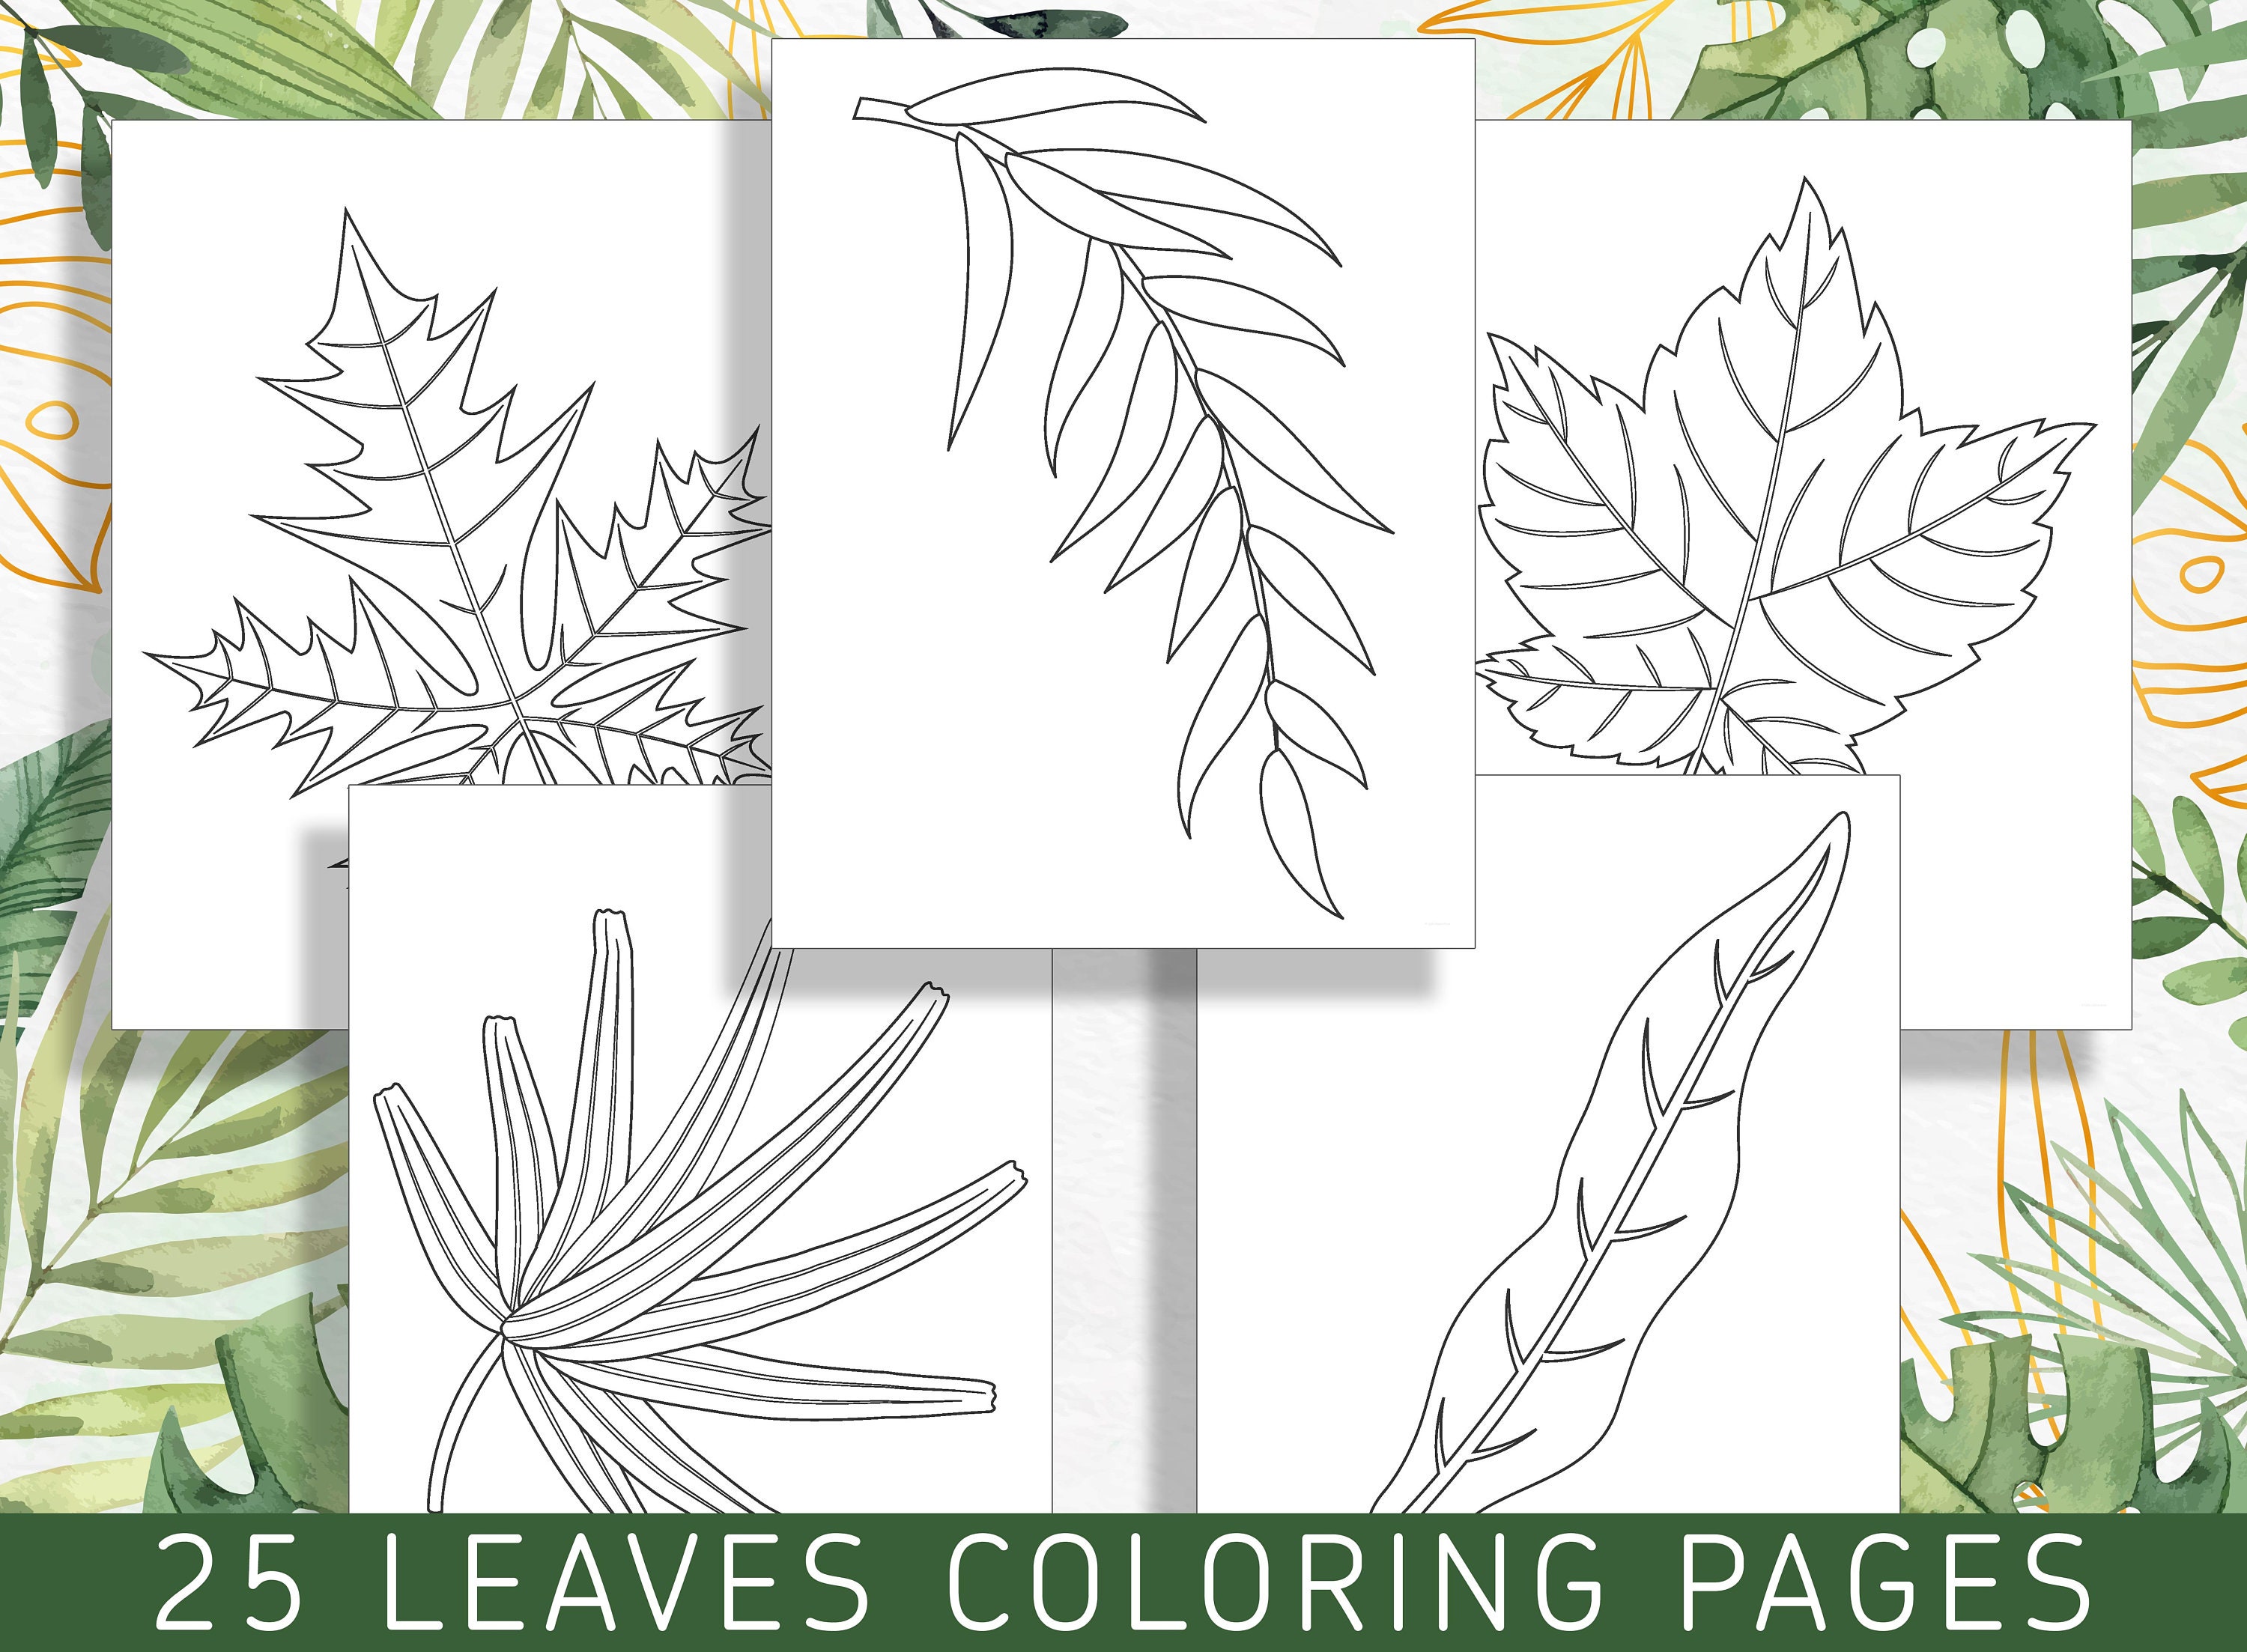 Escape to nature exquisite leaf coloring pages for stress relief and relaxation pdf file instant download